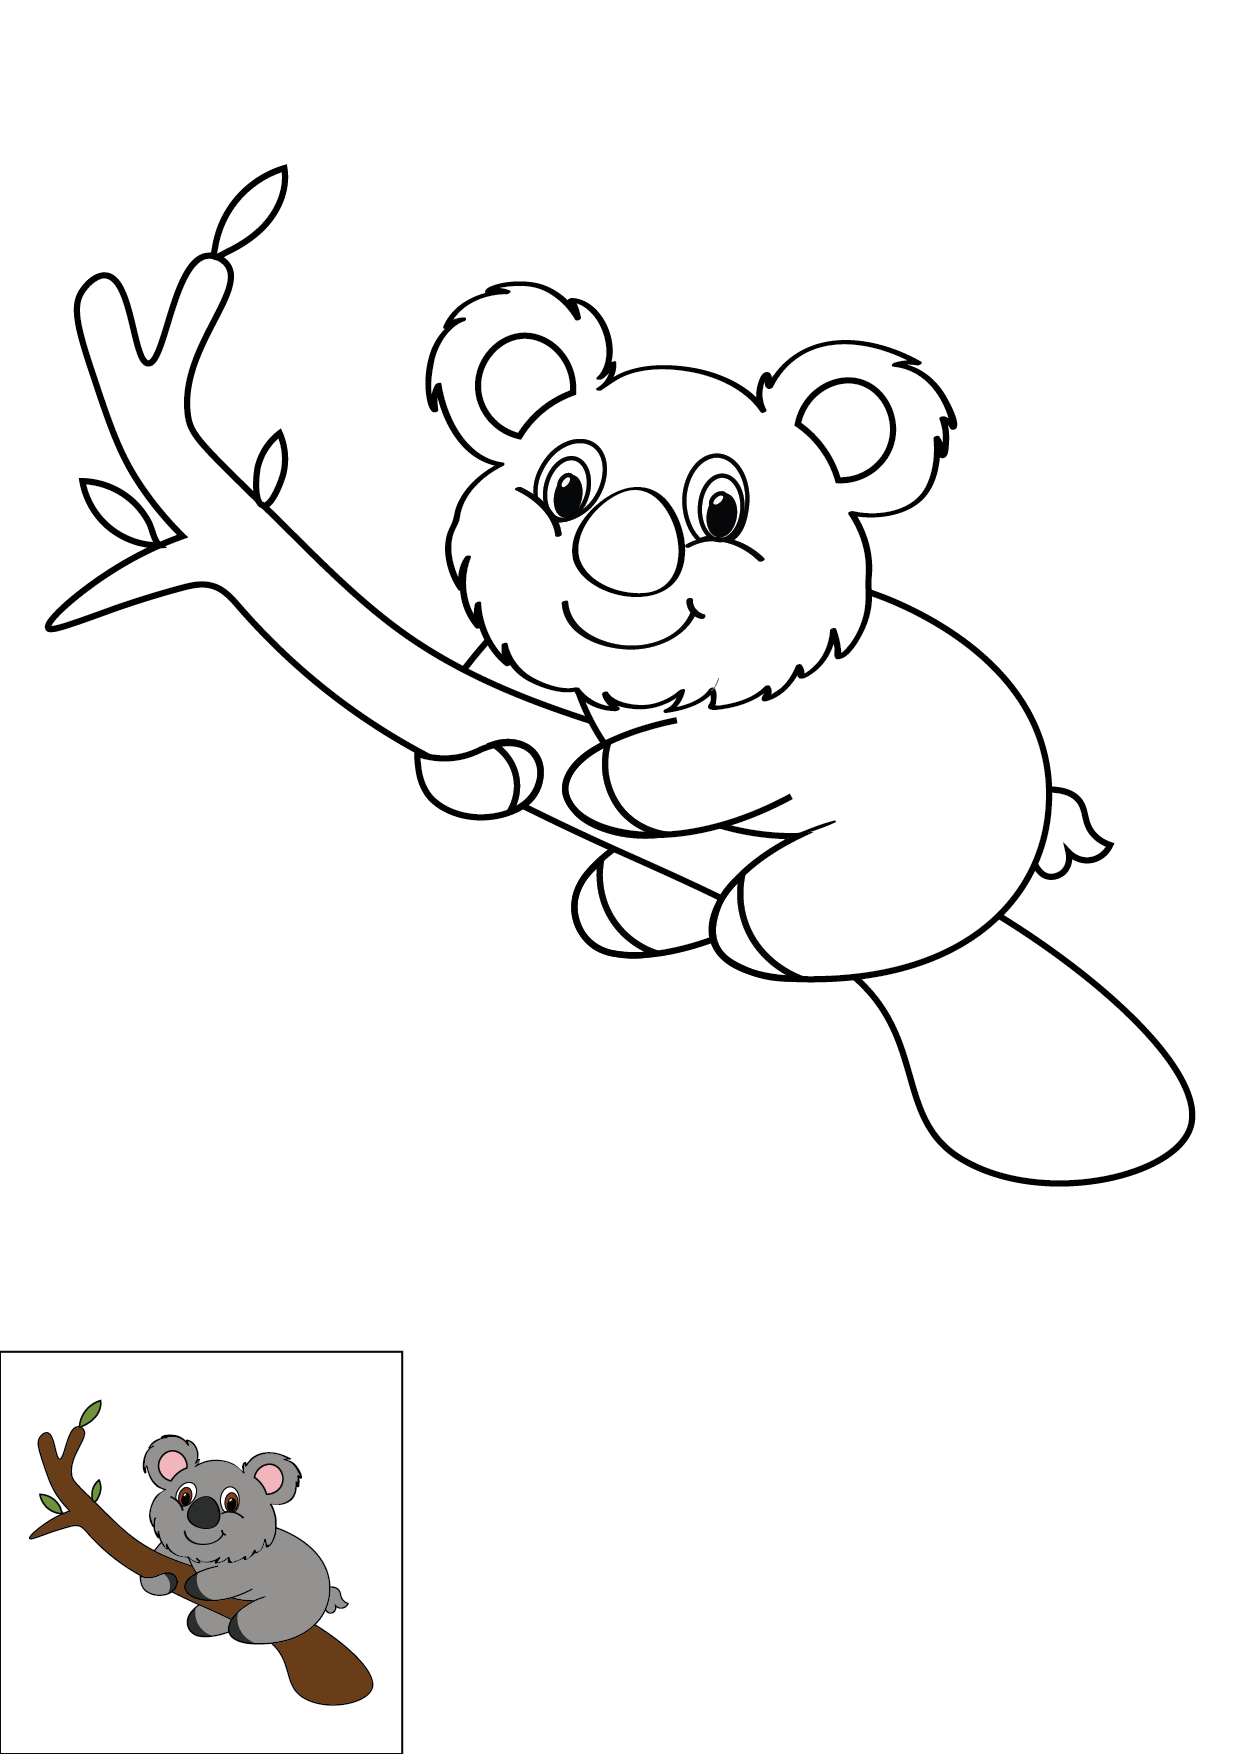 How to Draw A Koala Step by Step Printable Color